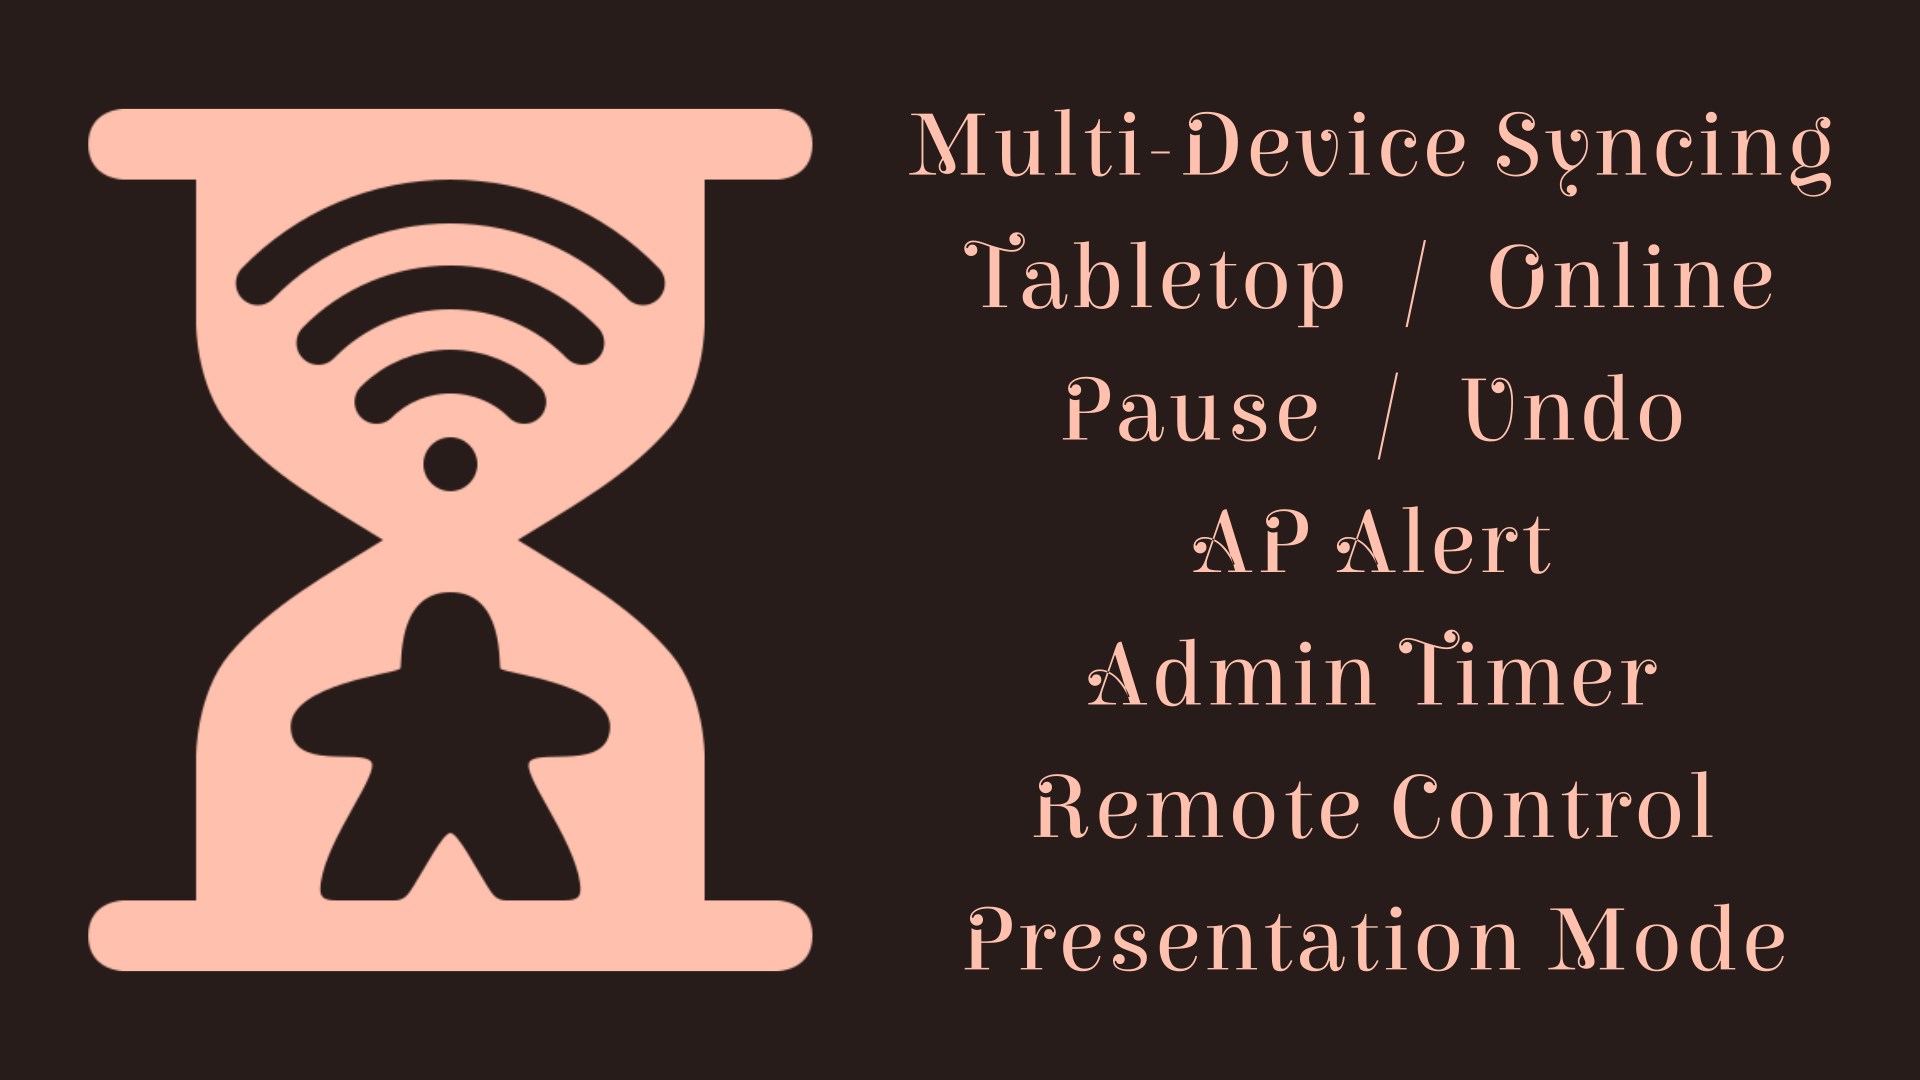 Multi Timer - Download & Review